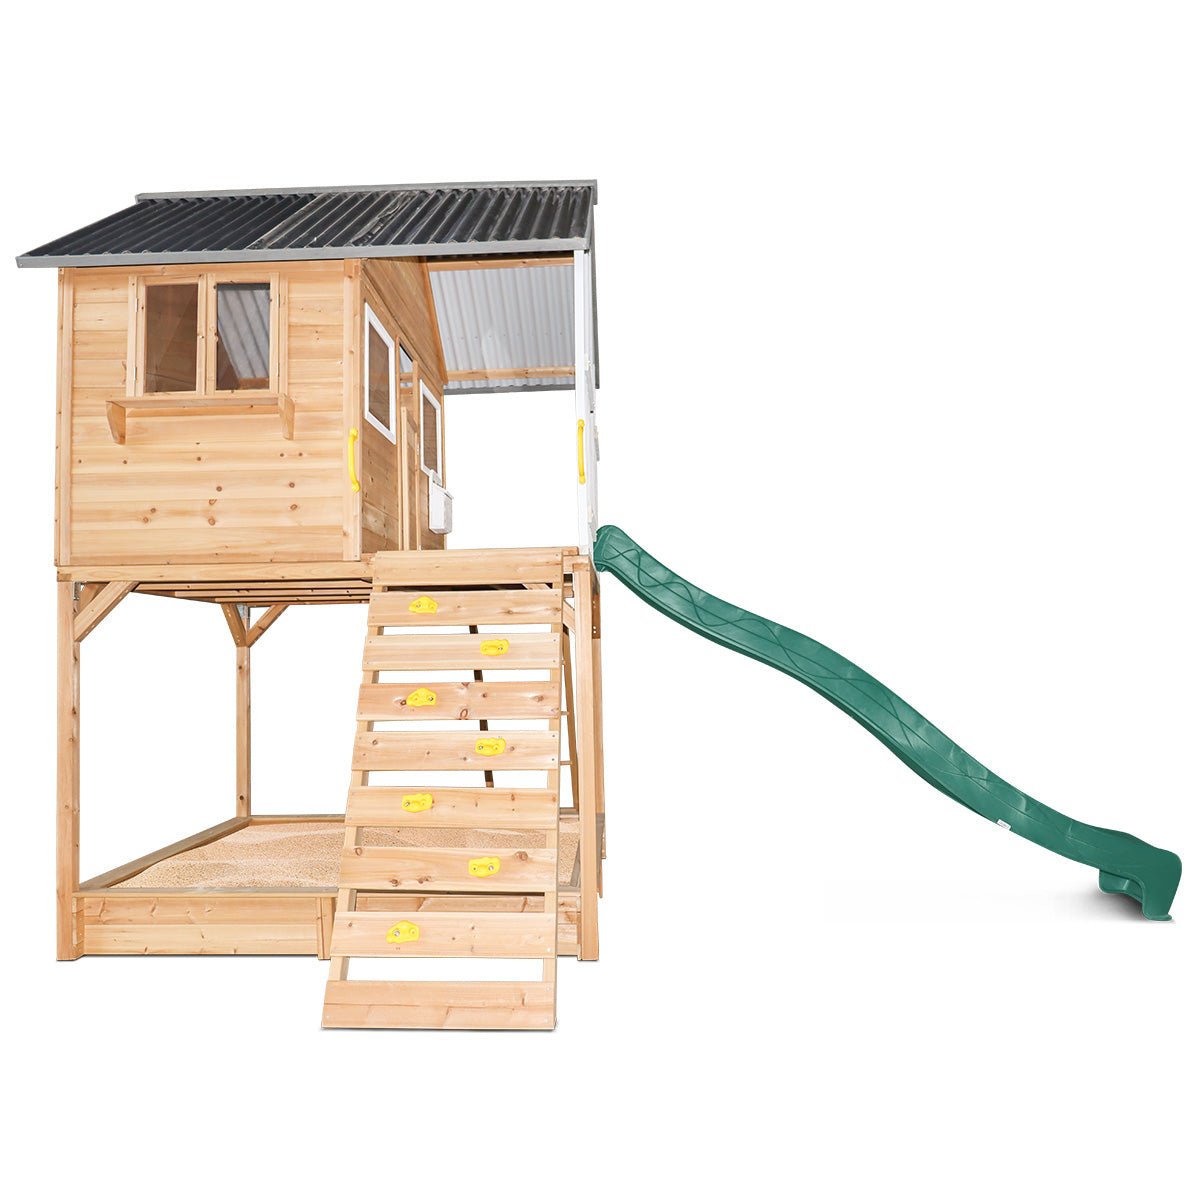 Winchester Cubby House with Elevation Platform with Green Slide - Kids Mega Mart